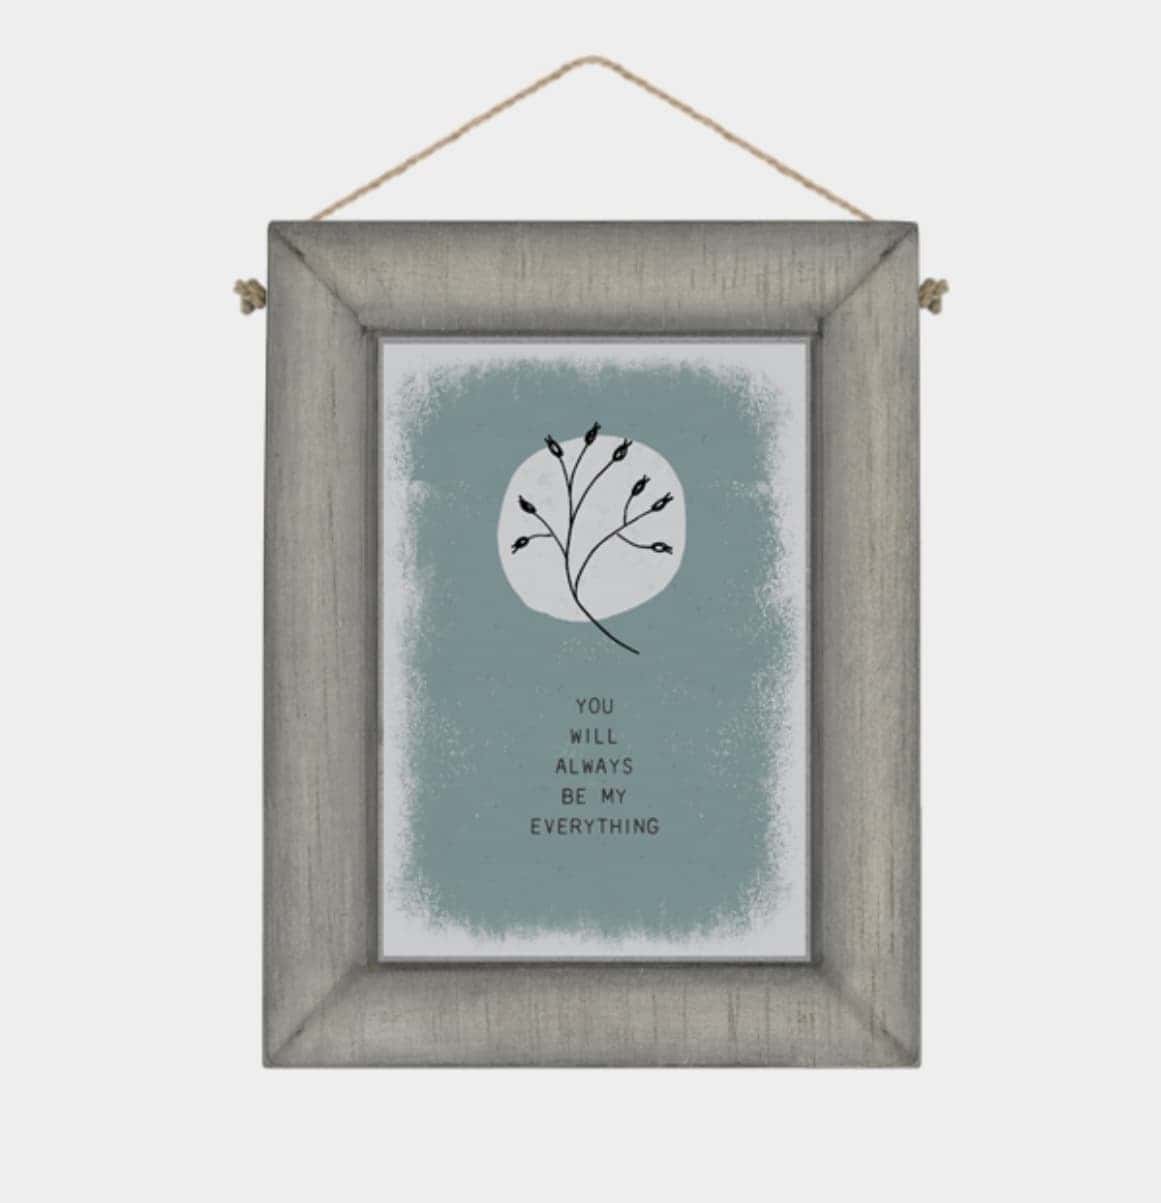 'You will always be my everything' Wooden Hedgerow Picture by East of India